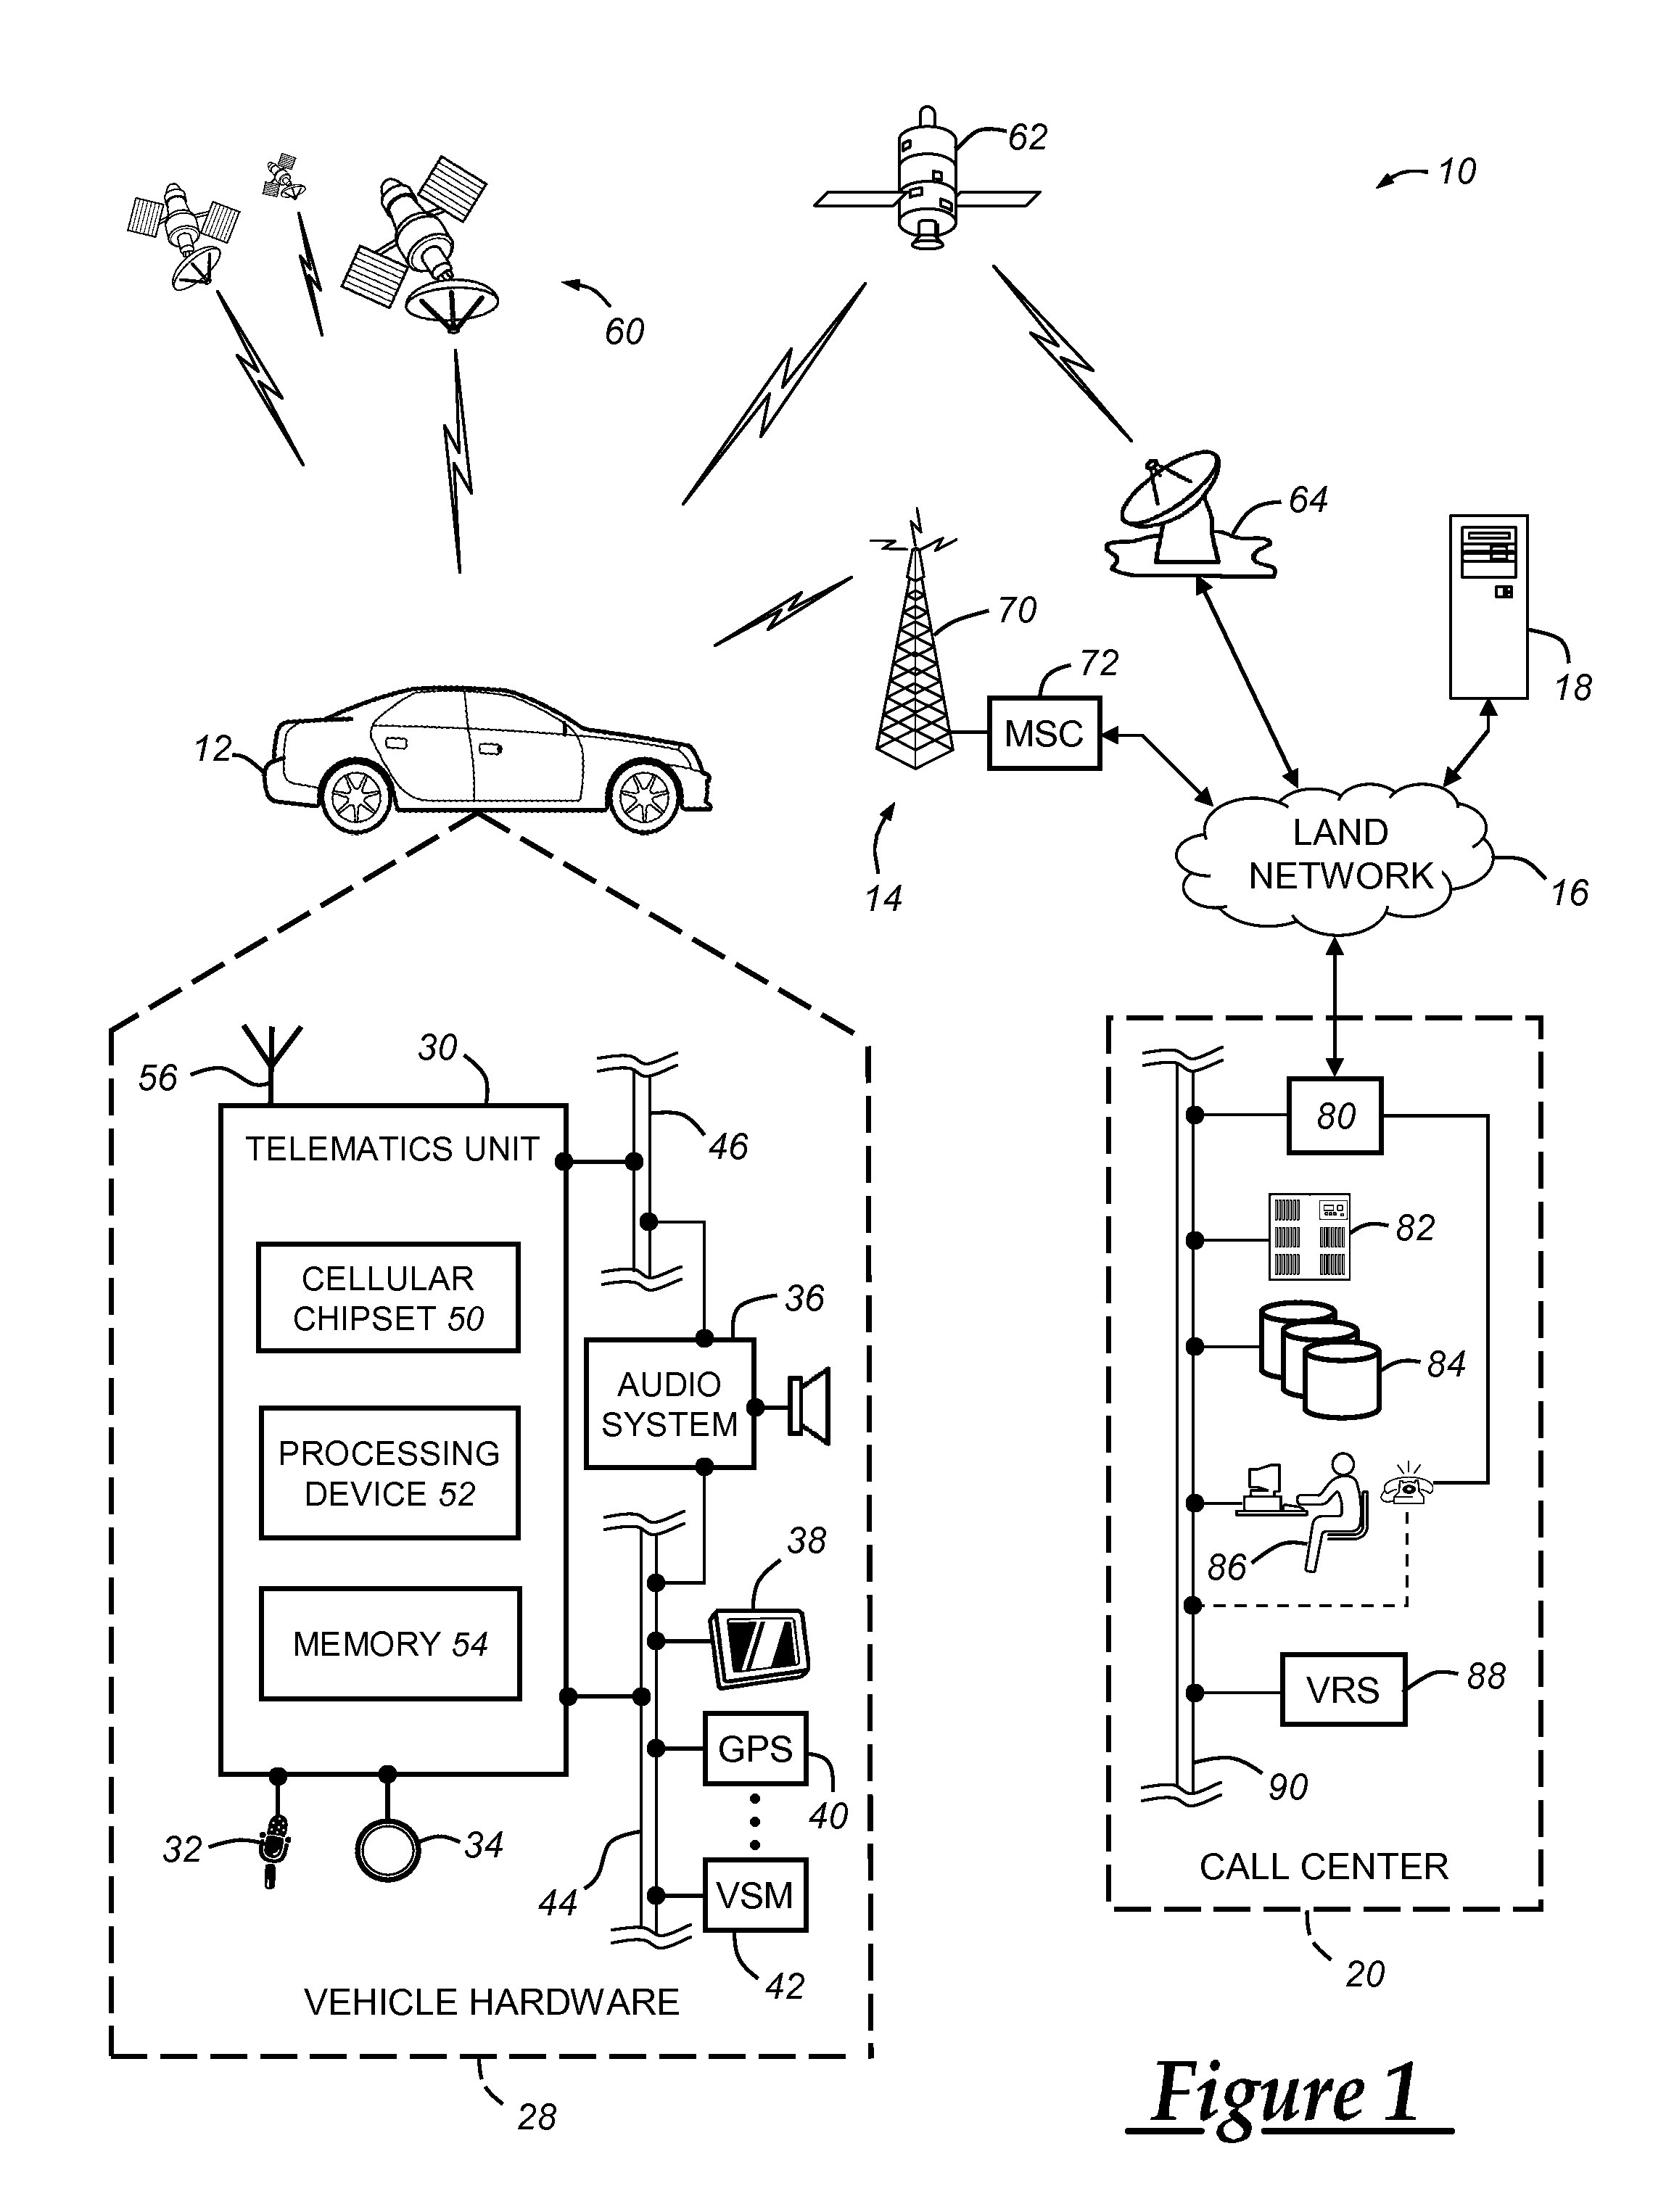 Route-based propulsion mode control for multimodal vehicles